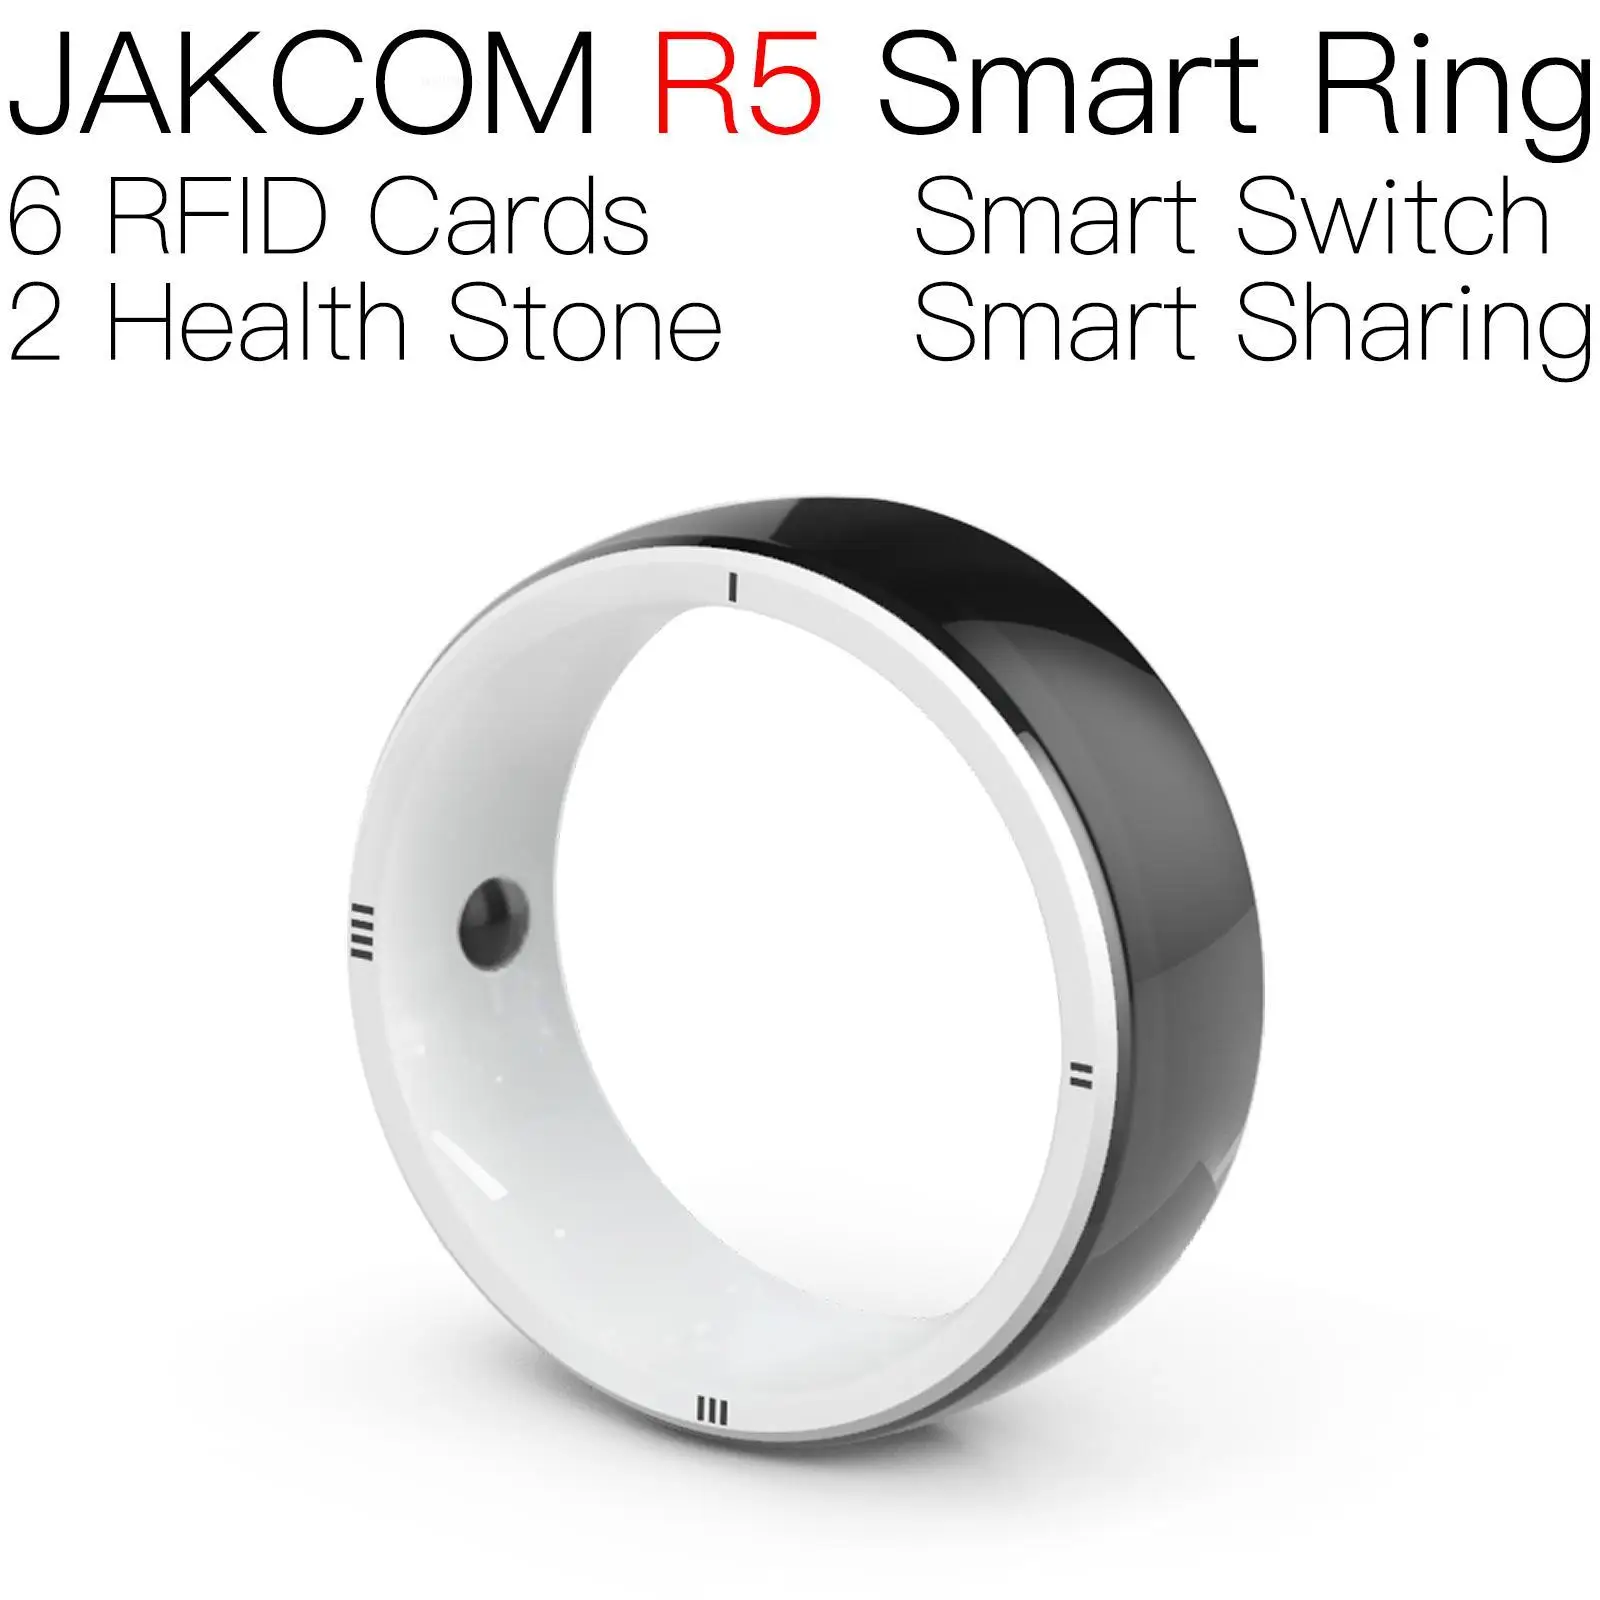 

JAKCOM R5 Smart Ring New product as rfid tag kids top214 printable labels empty wasabi dx mode chip smarth 5g nfc test tomzn